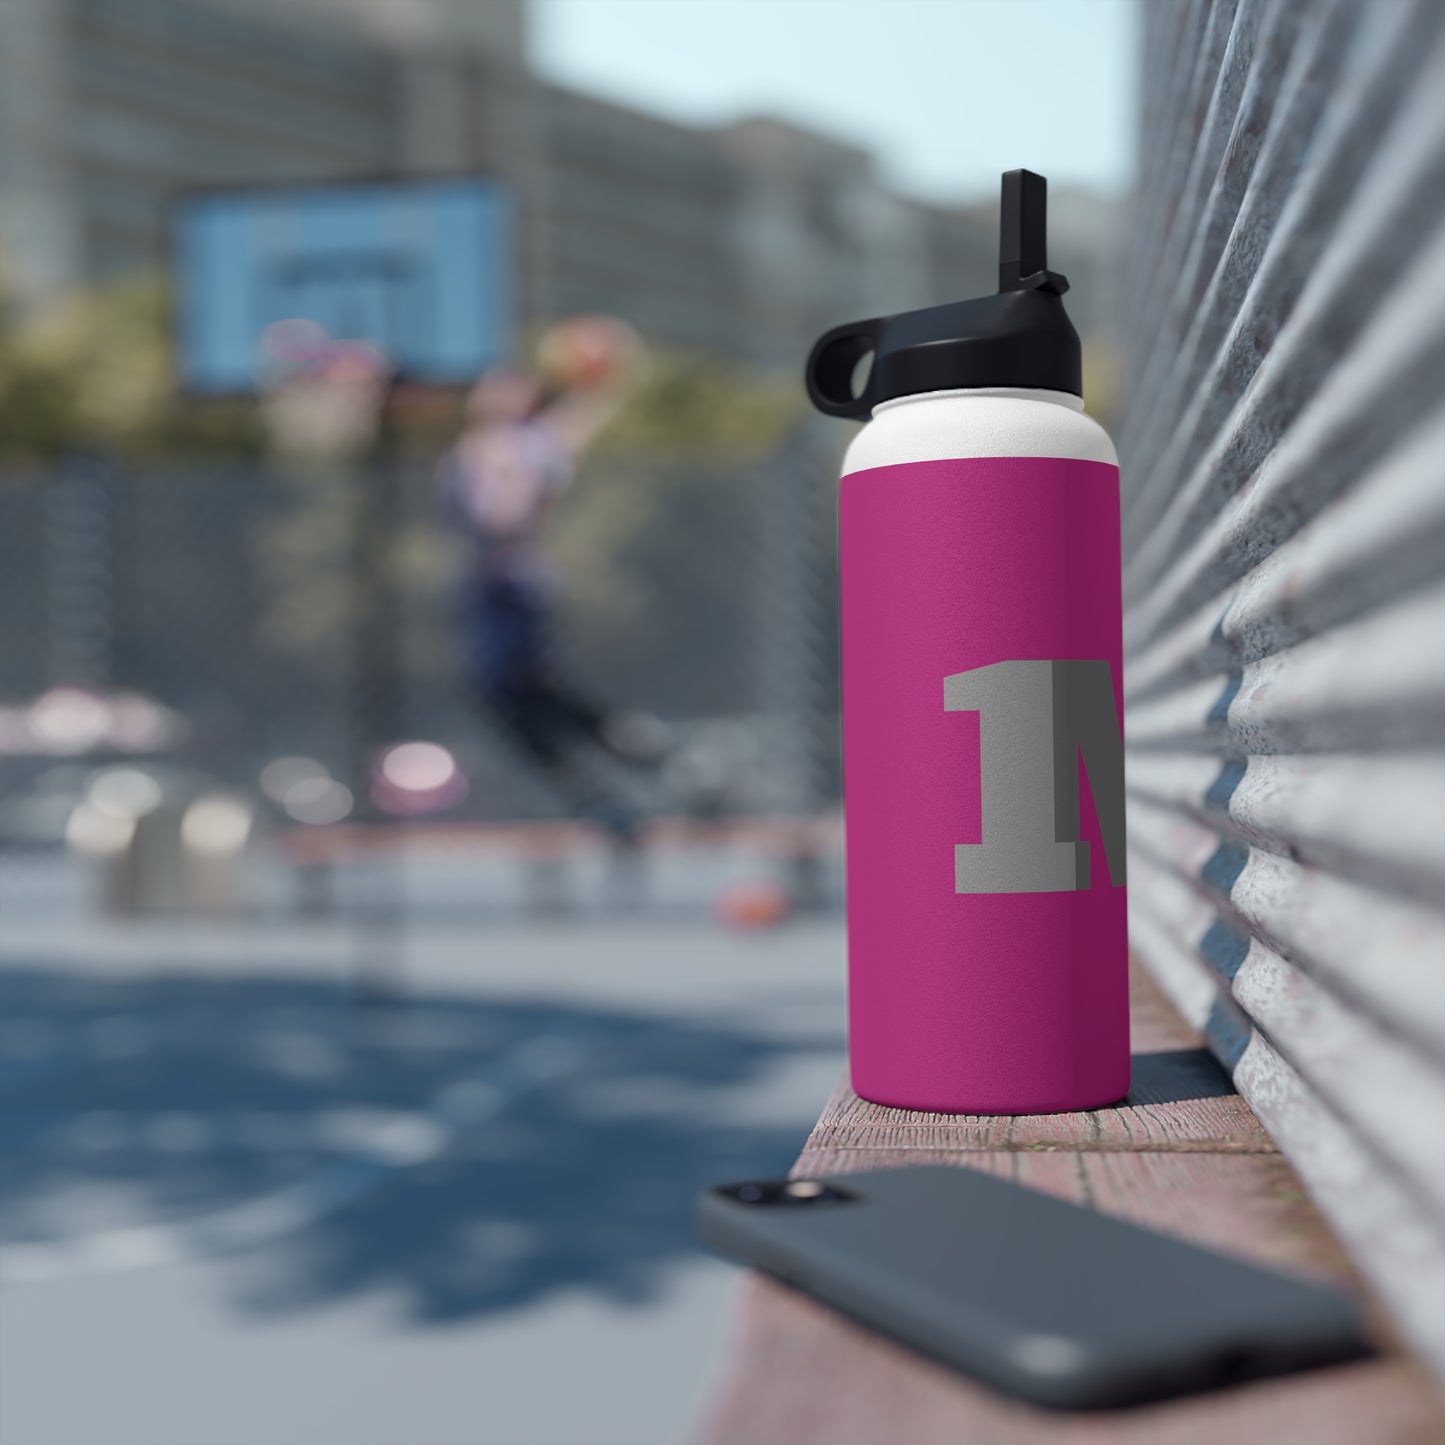 PINK 1M STAINLESS STEEL WATER BOTTLE